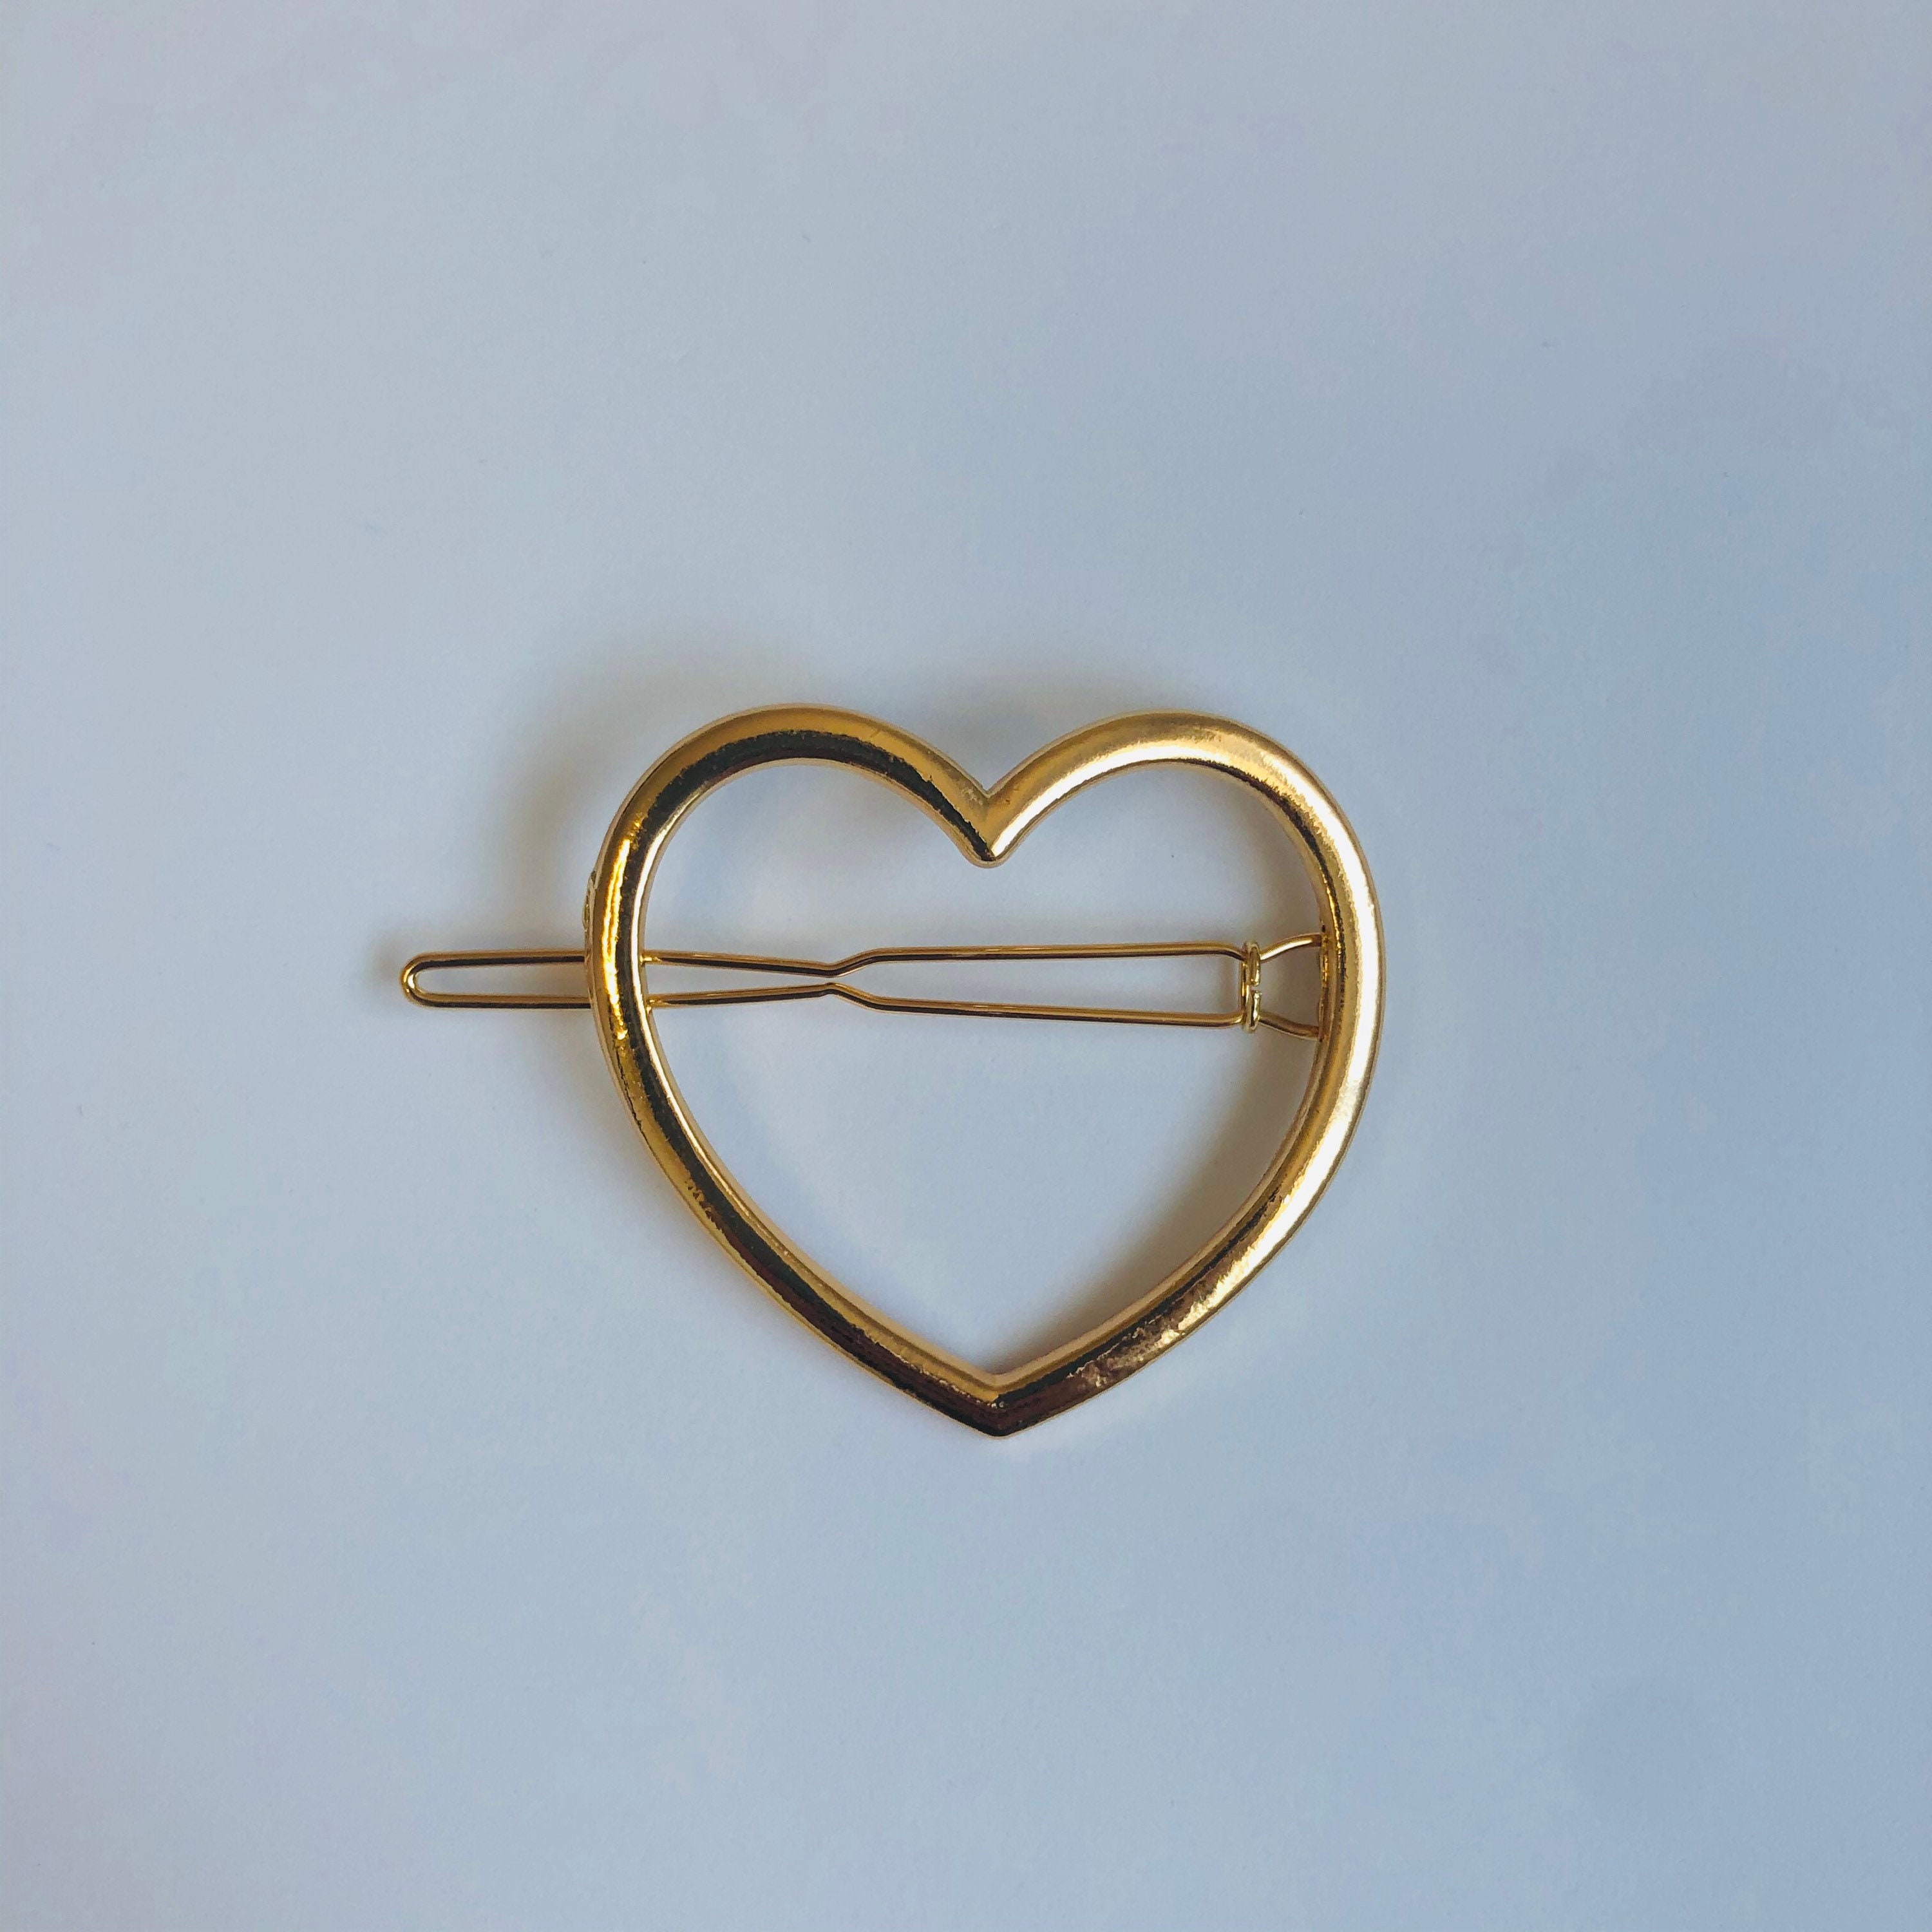 Stylish Geometric Heart Design Brushed Gold/Silver Hair Clips Hairpins 